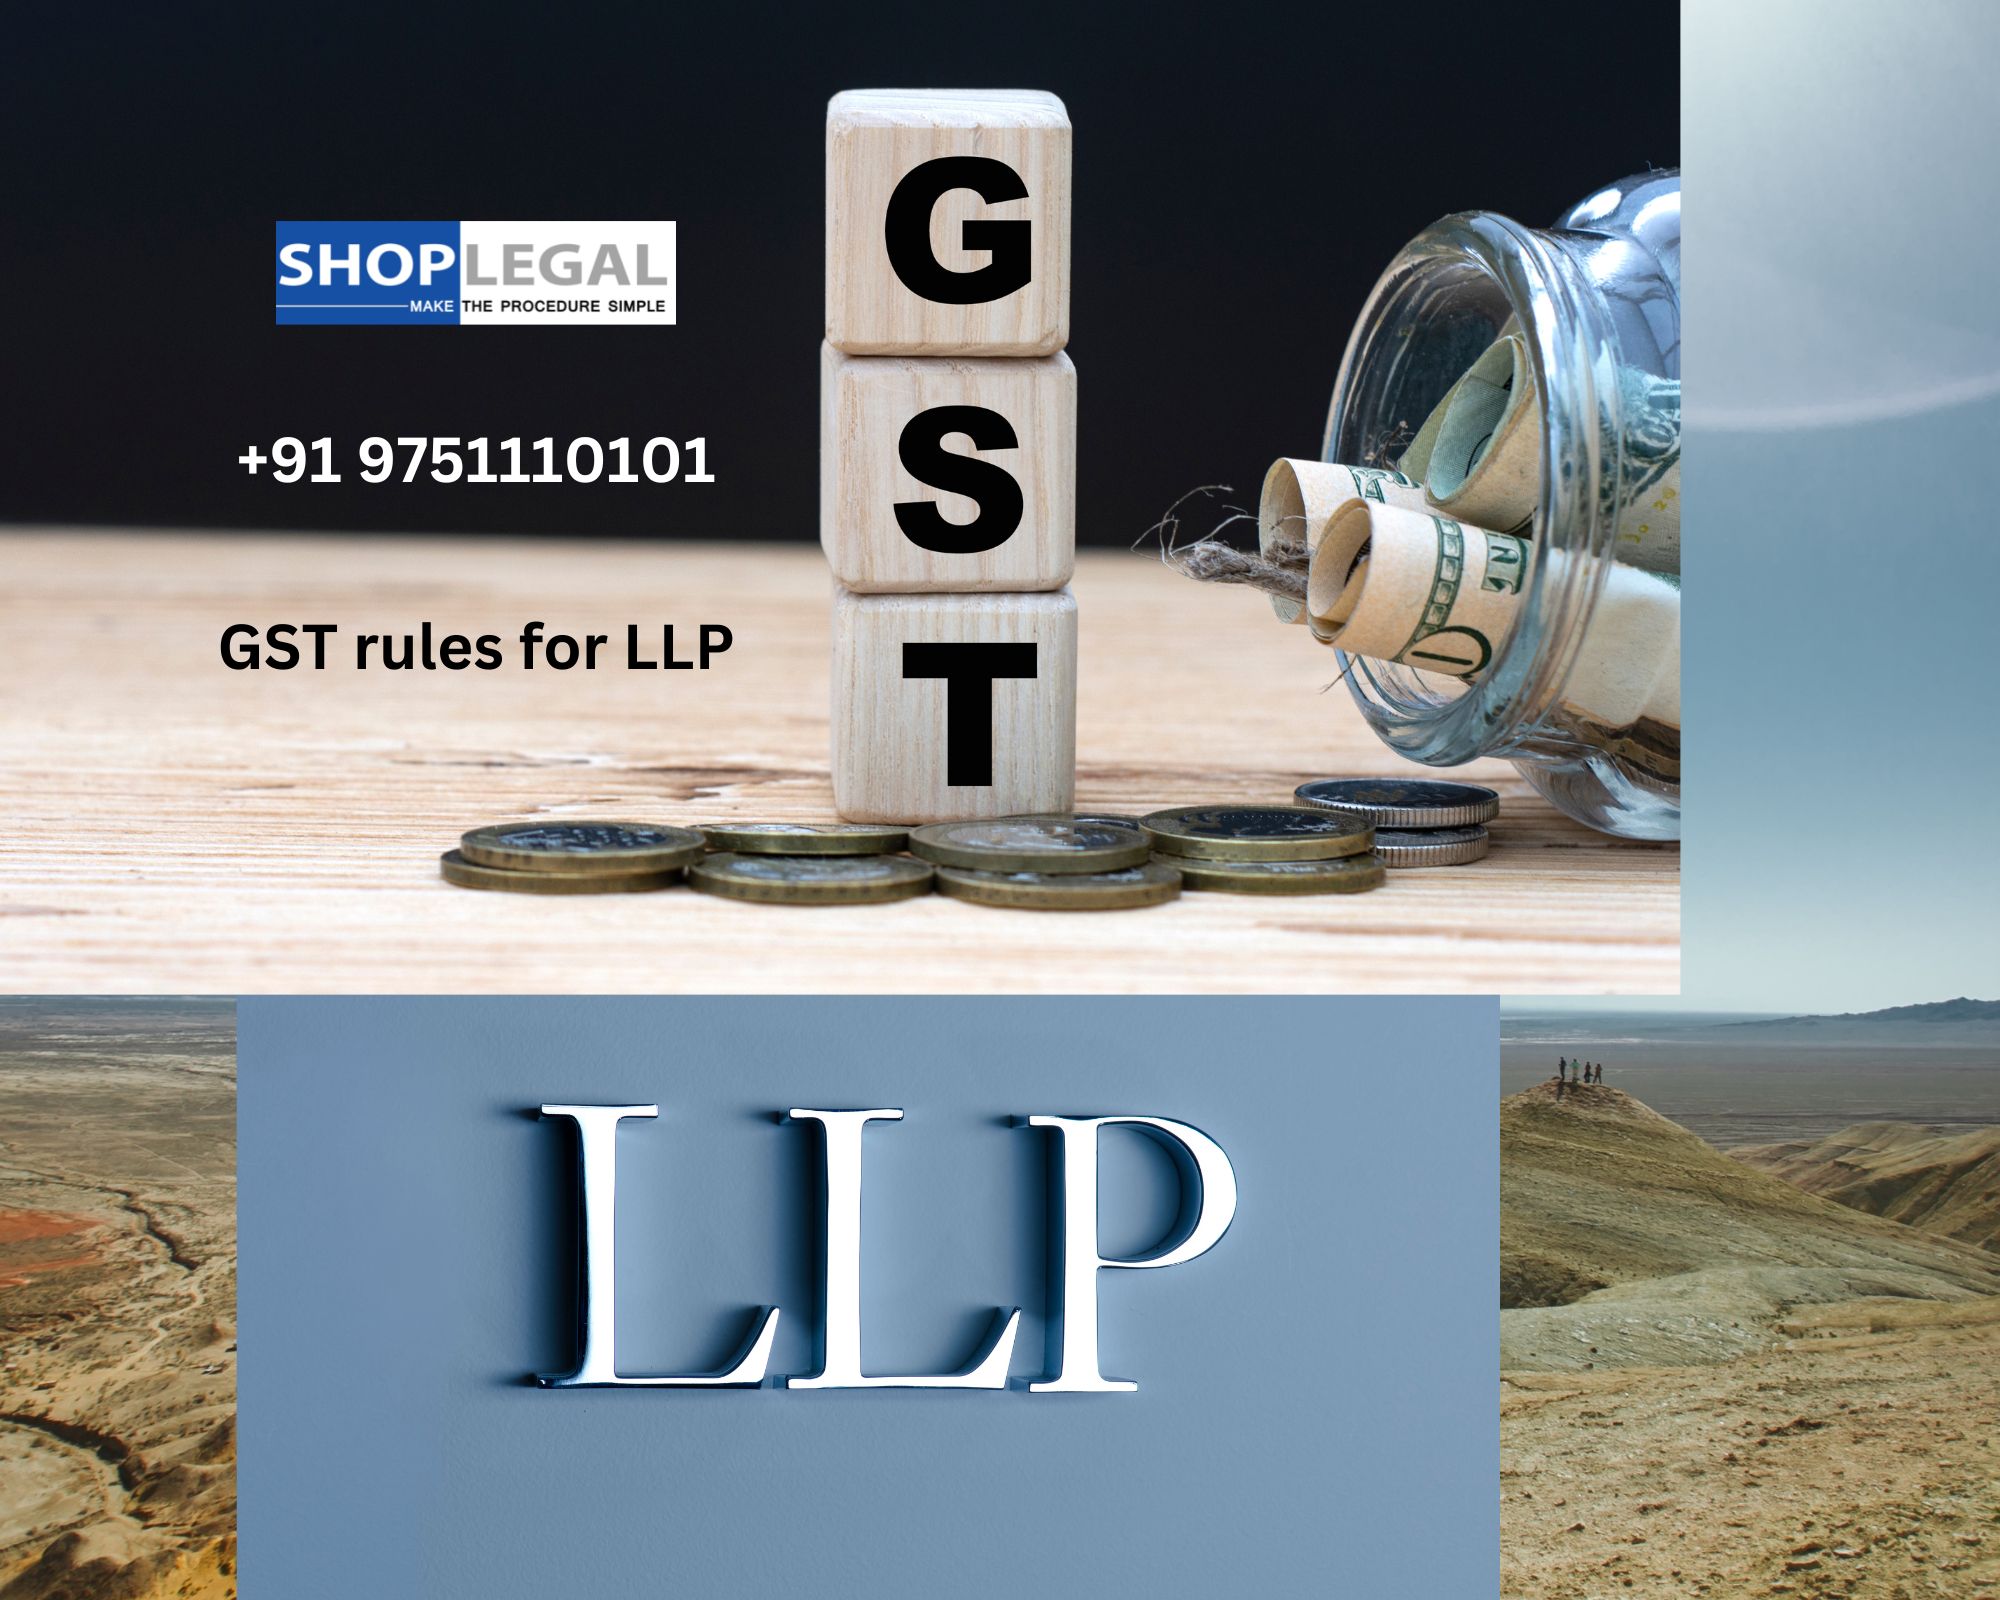 GST rules for LLP